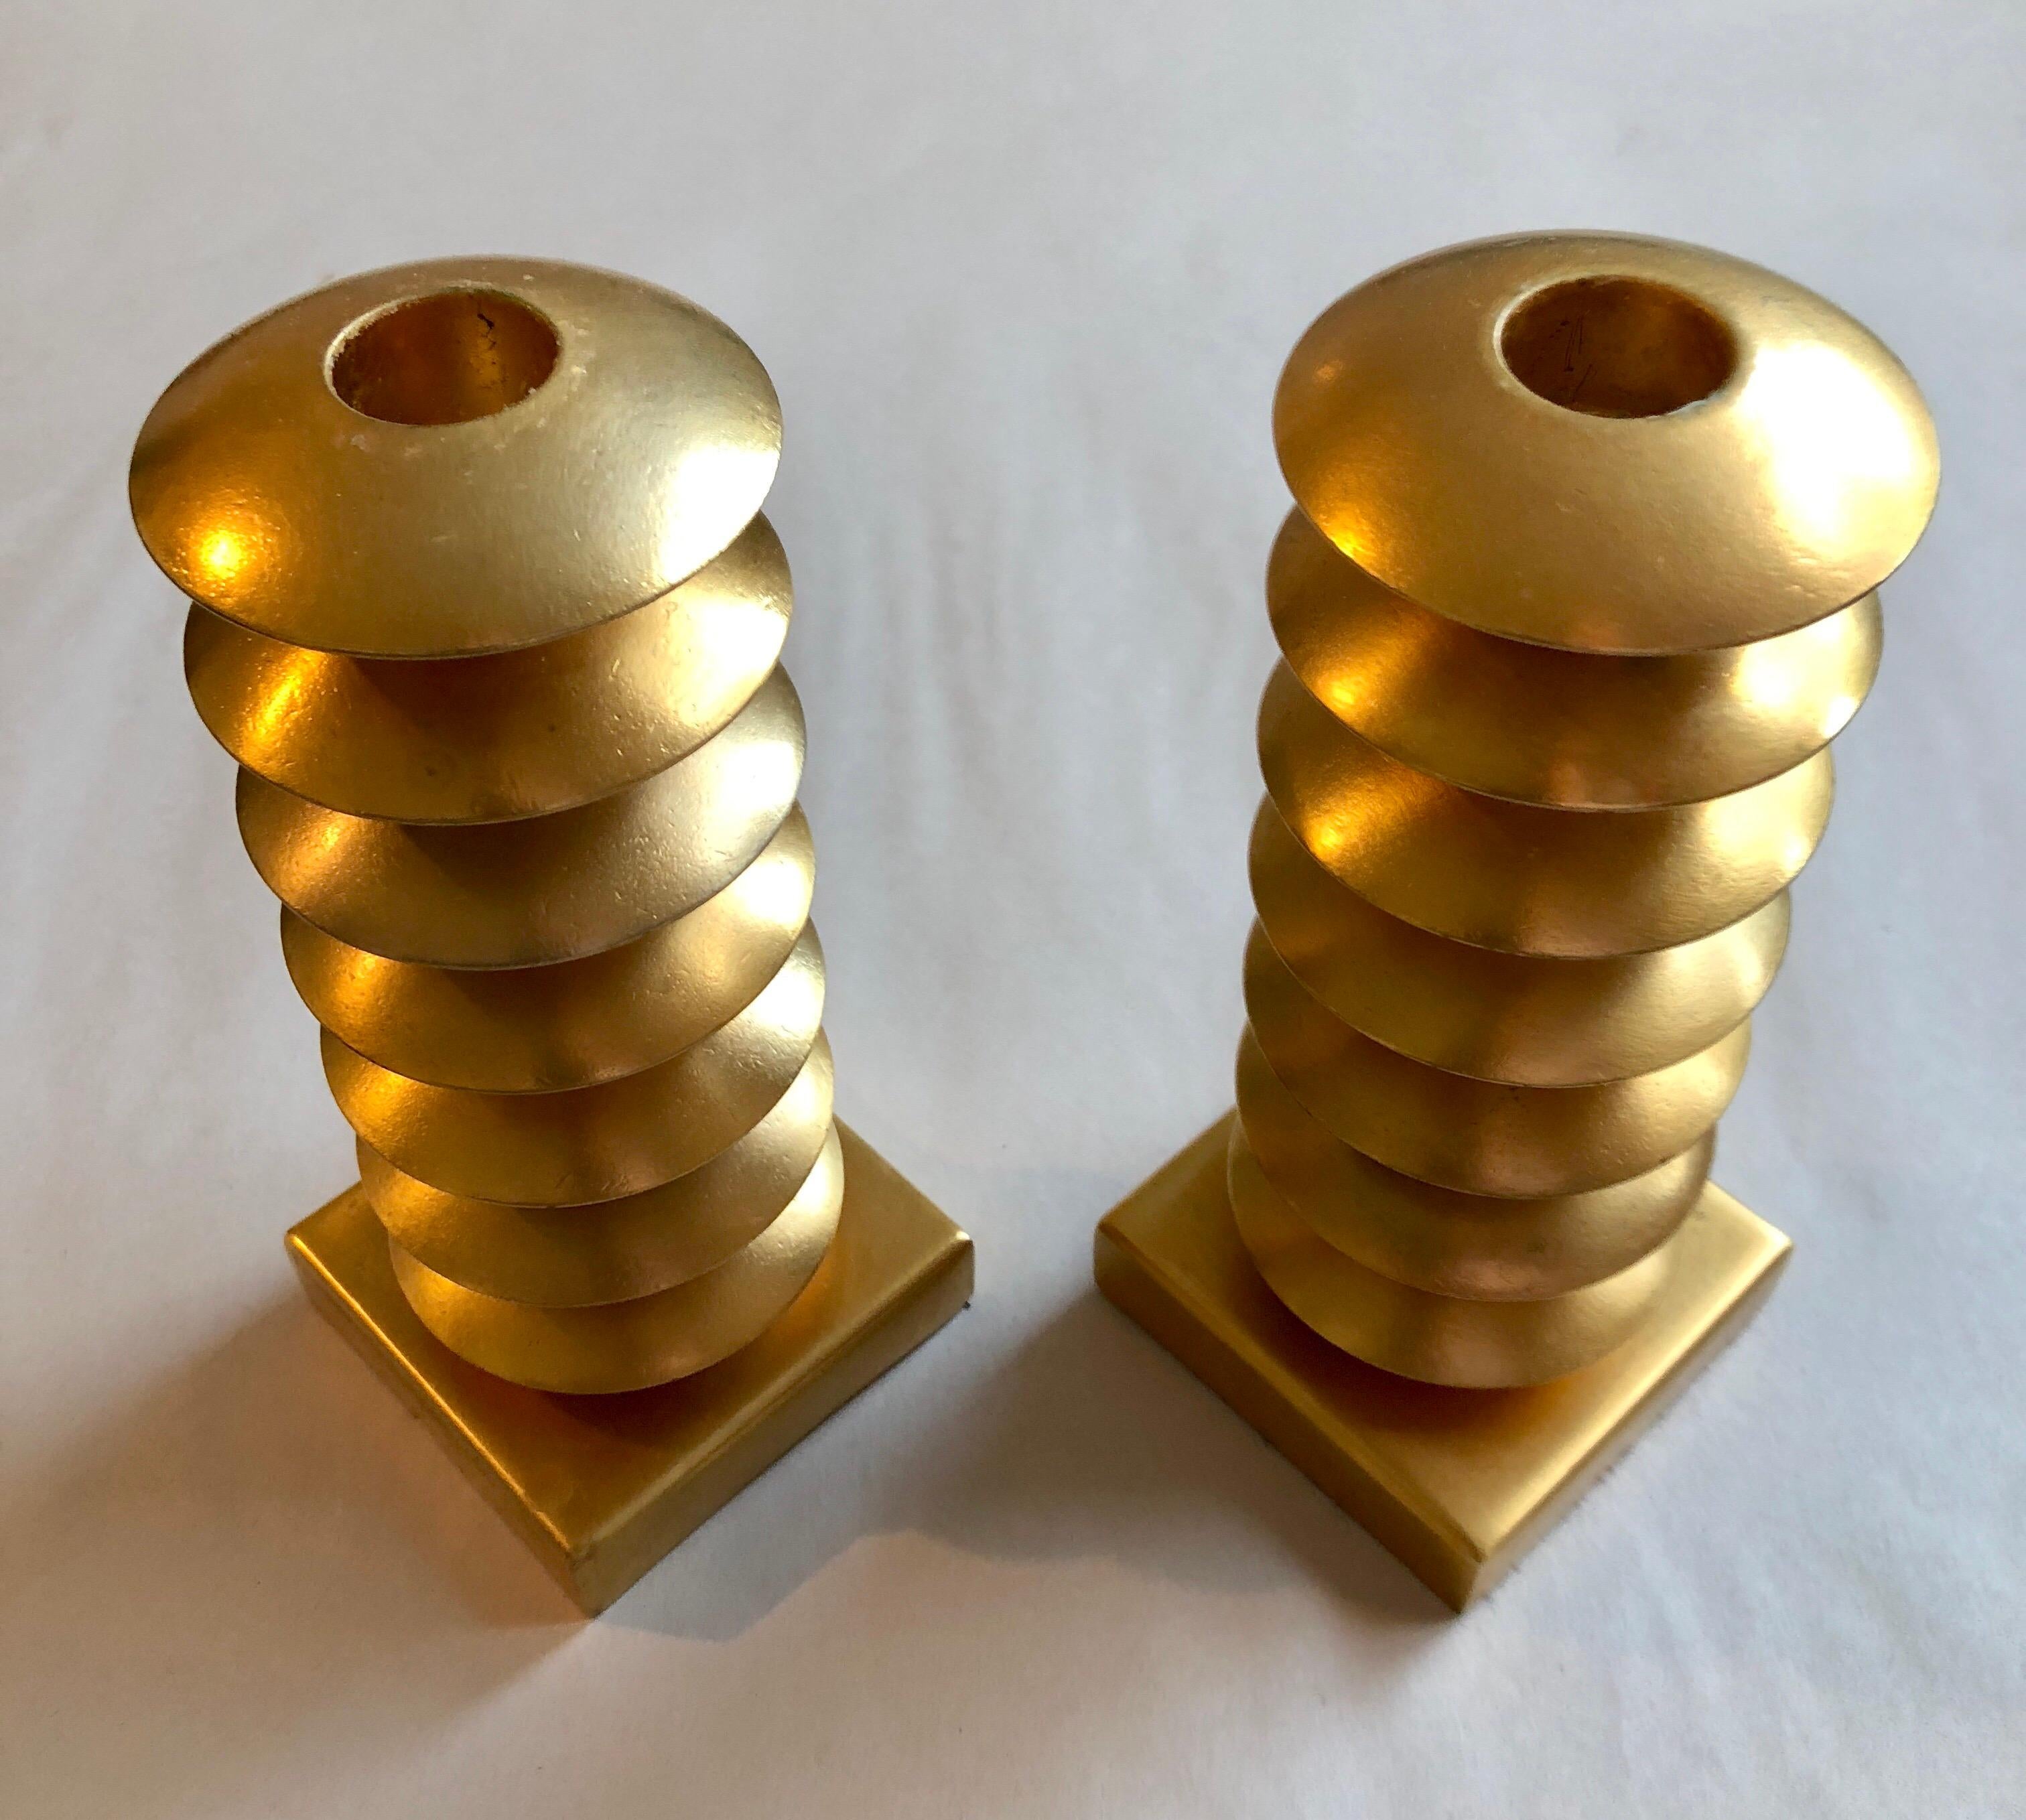 Elegant gold gilt design metal candleholders, circa 1980, France. Signed Illegibly on bottom felt. It appears to be Elizabeth and then something else but it is not clear these candle sticks are possibly designed by Garouste & Bonetti. These would go